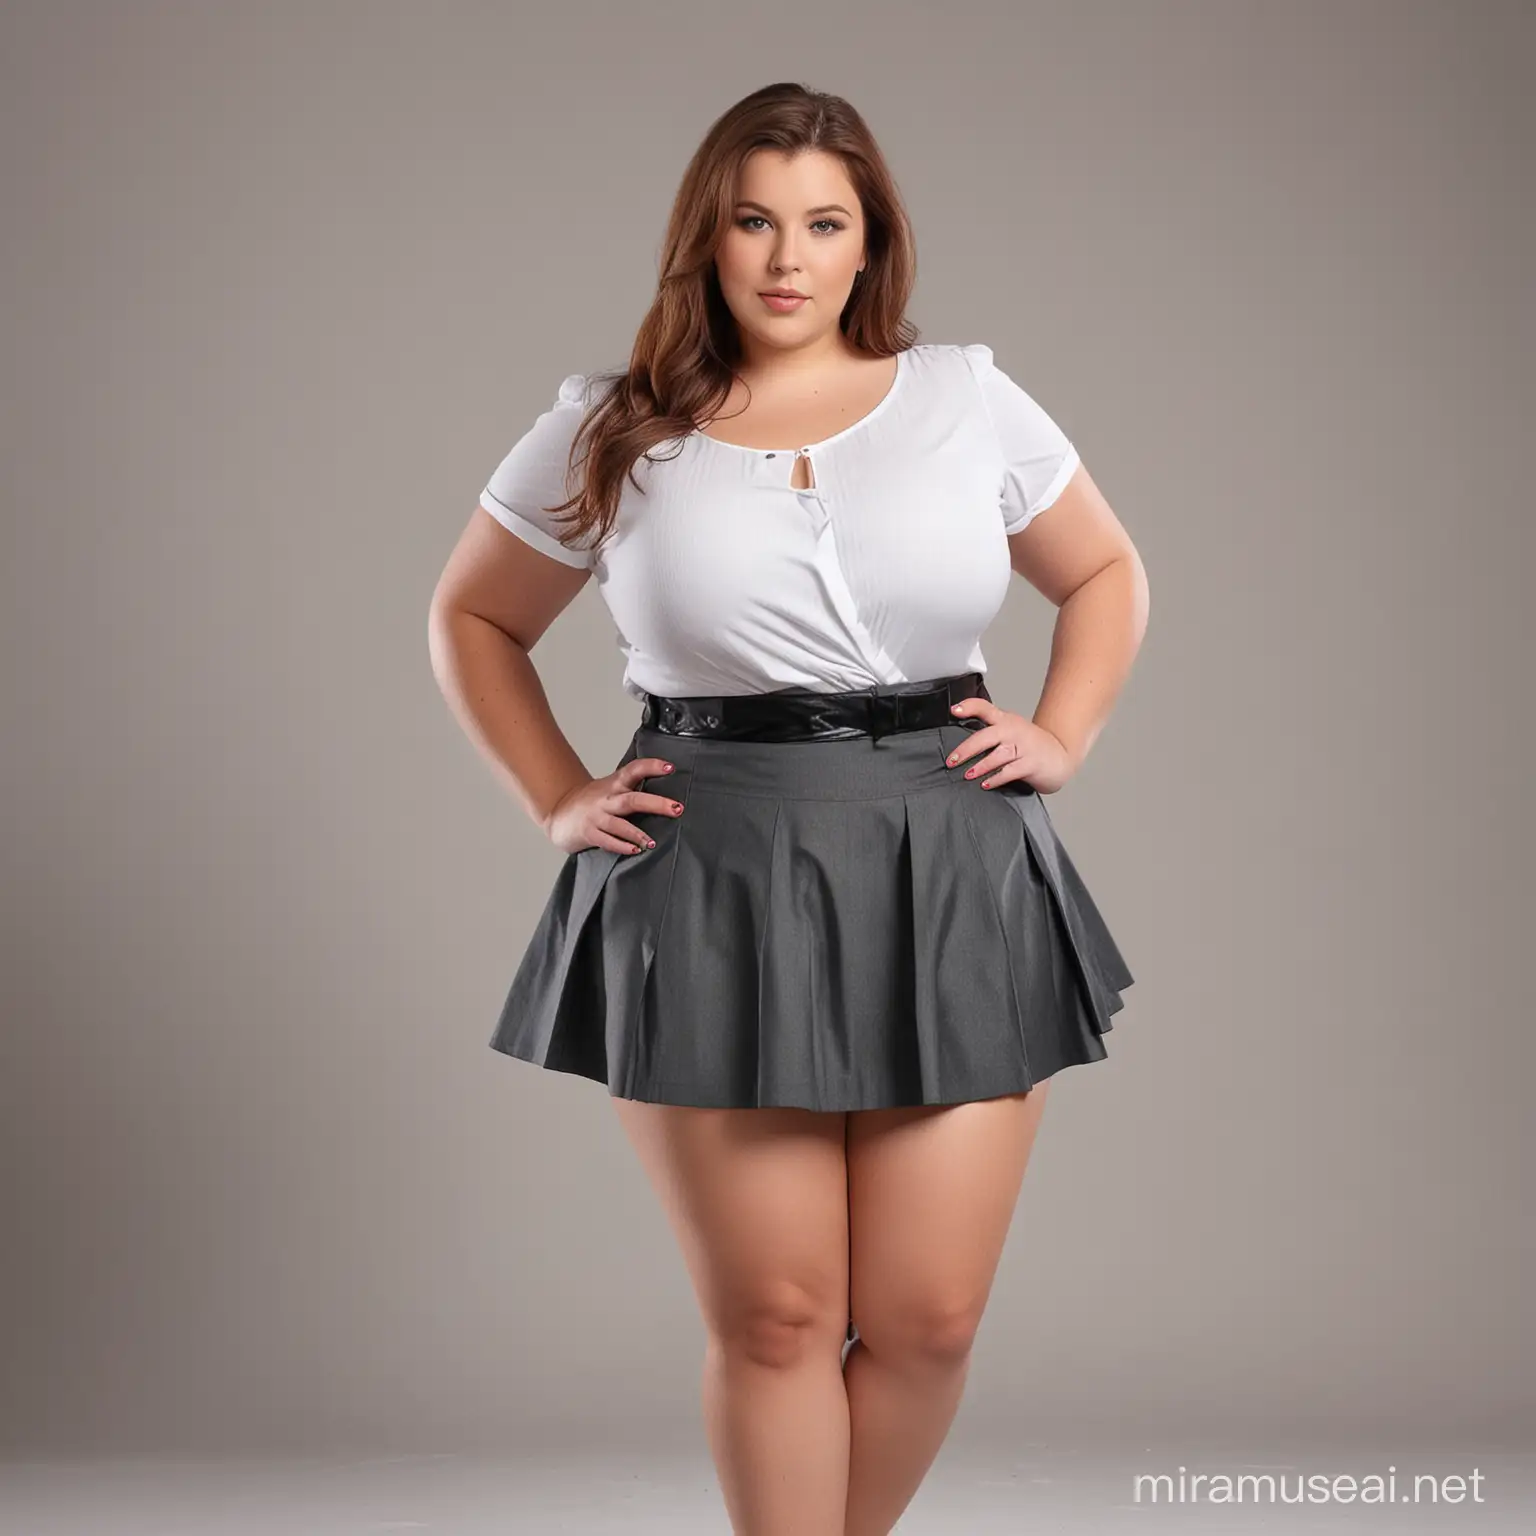 young bbw nicely dressed short skirt facing front 